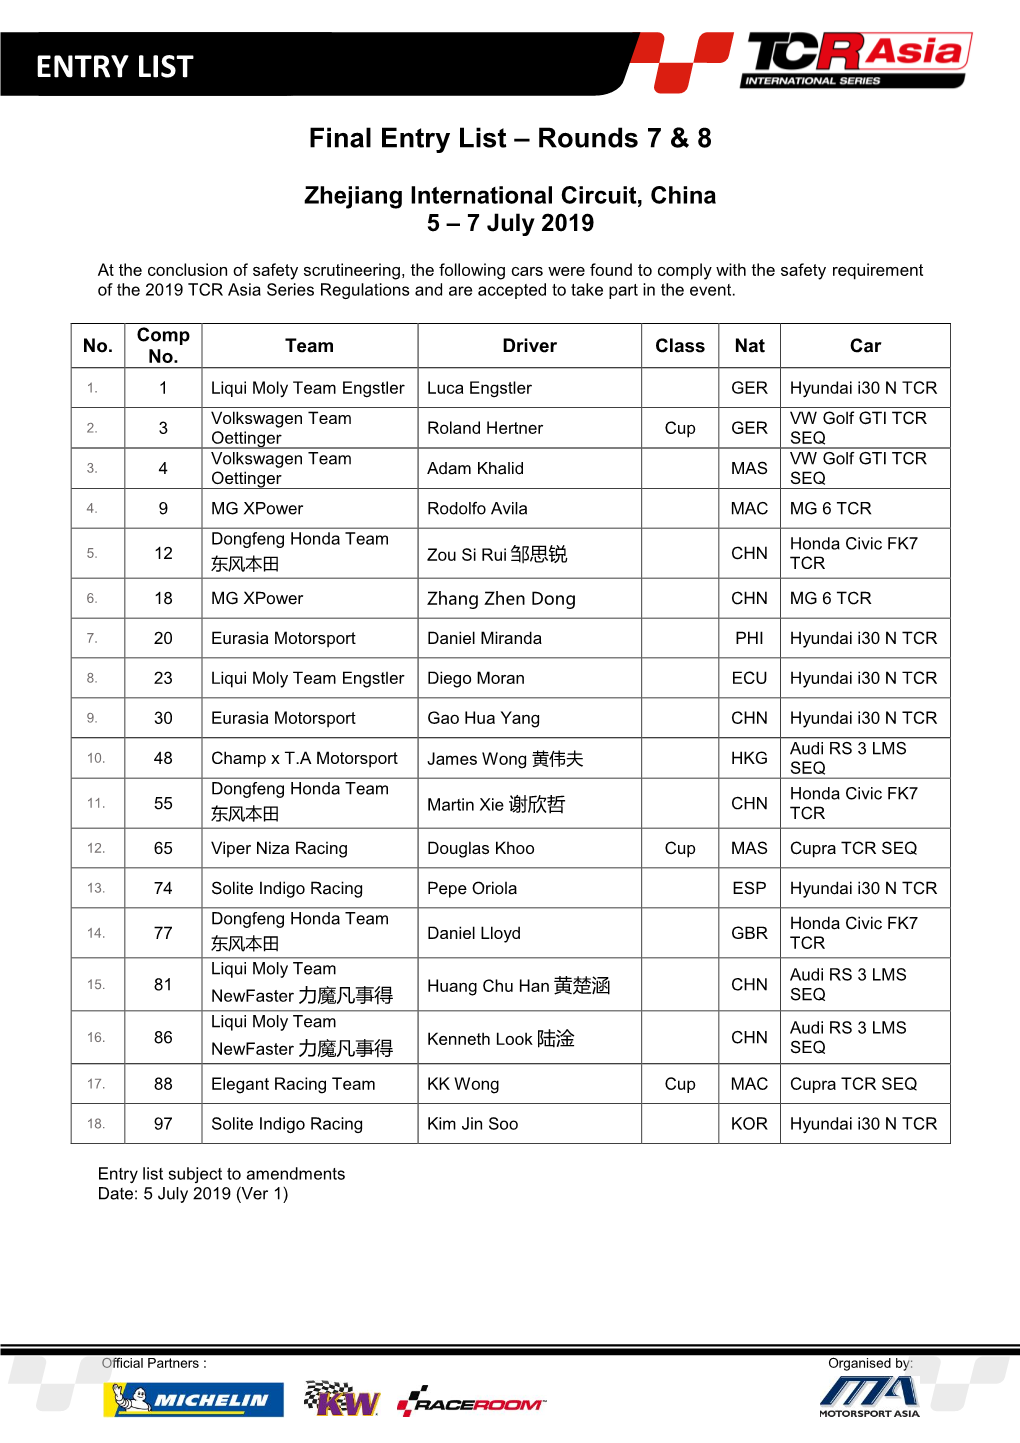 Final Entry List – Rounds 7 & 8